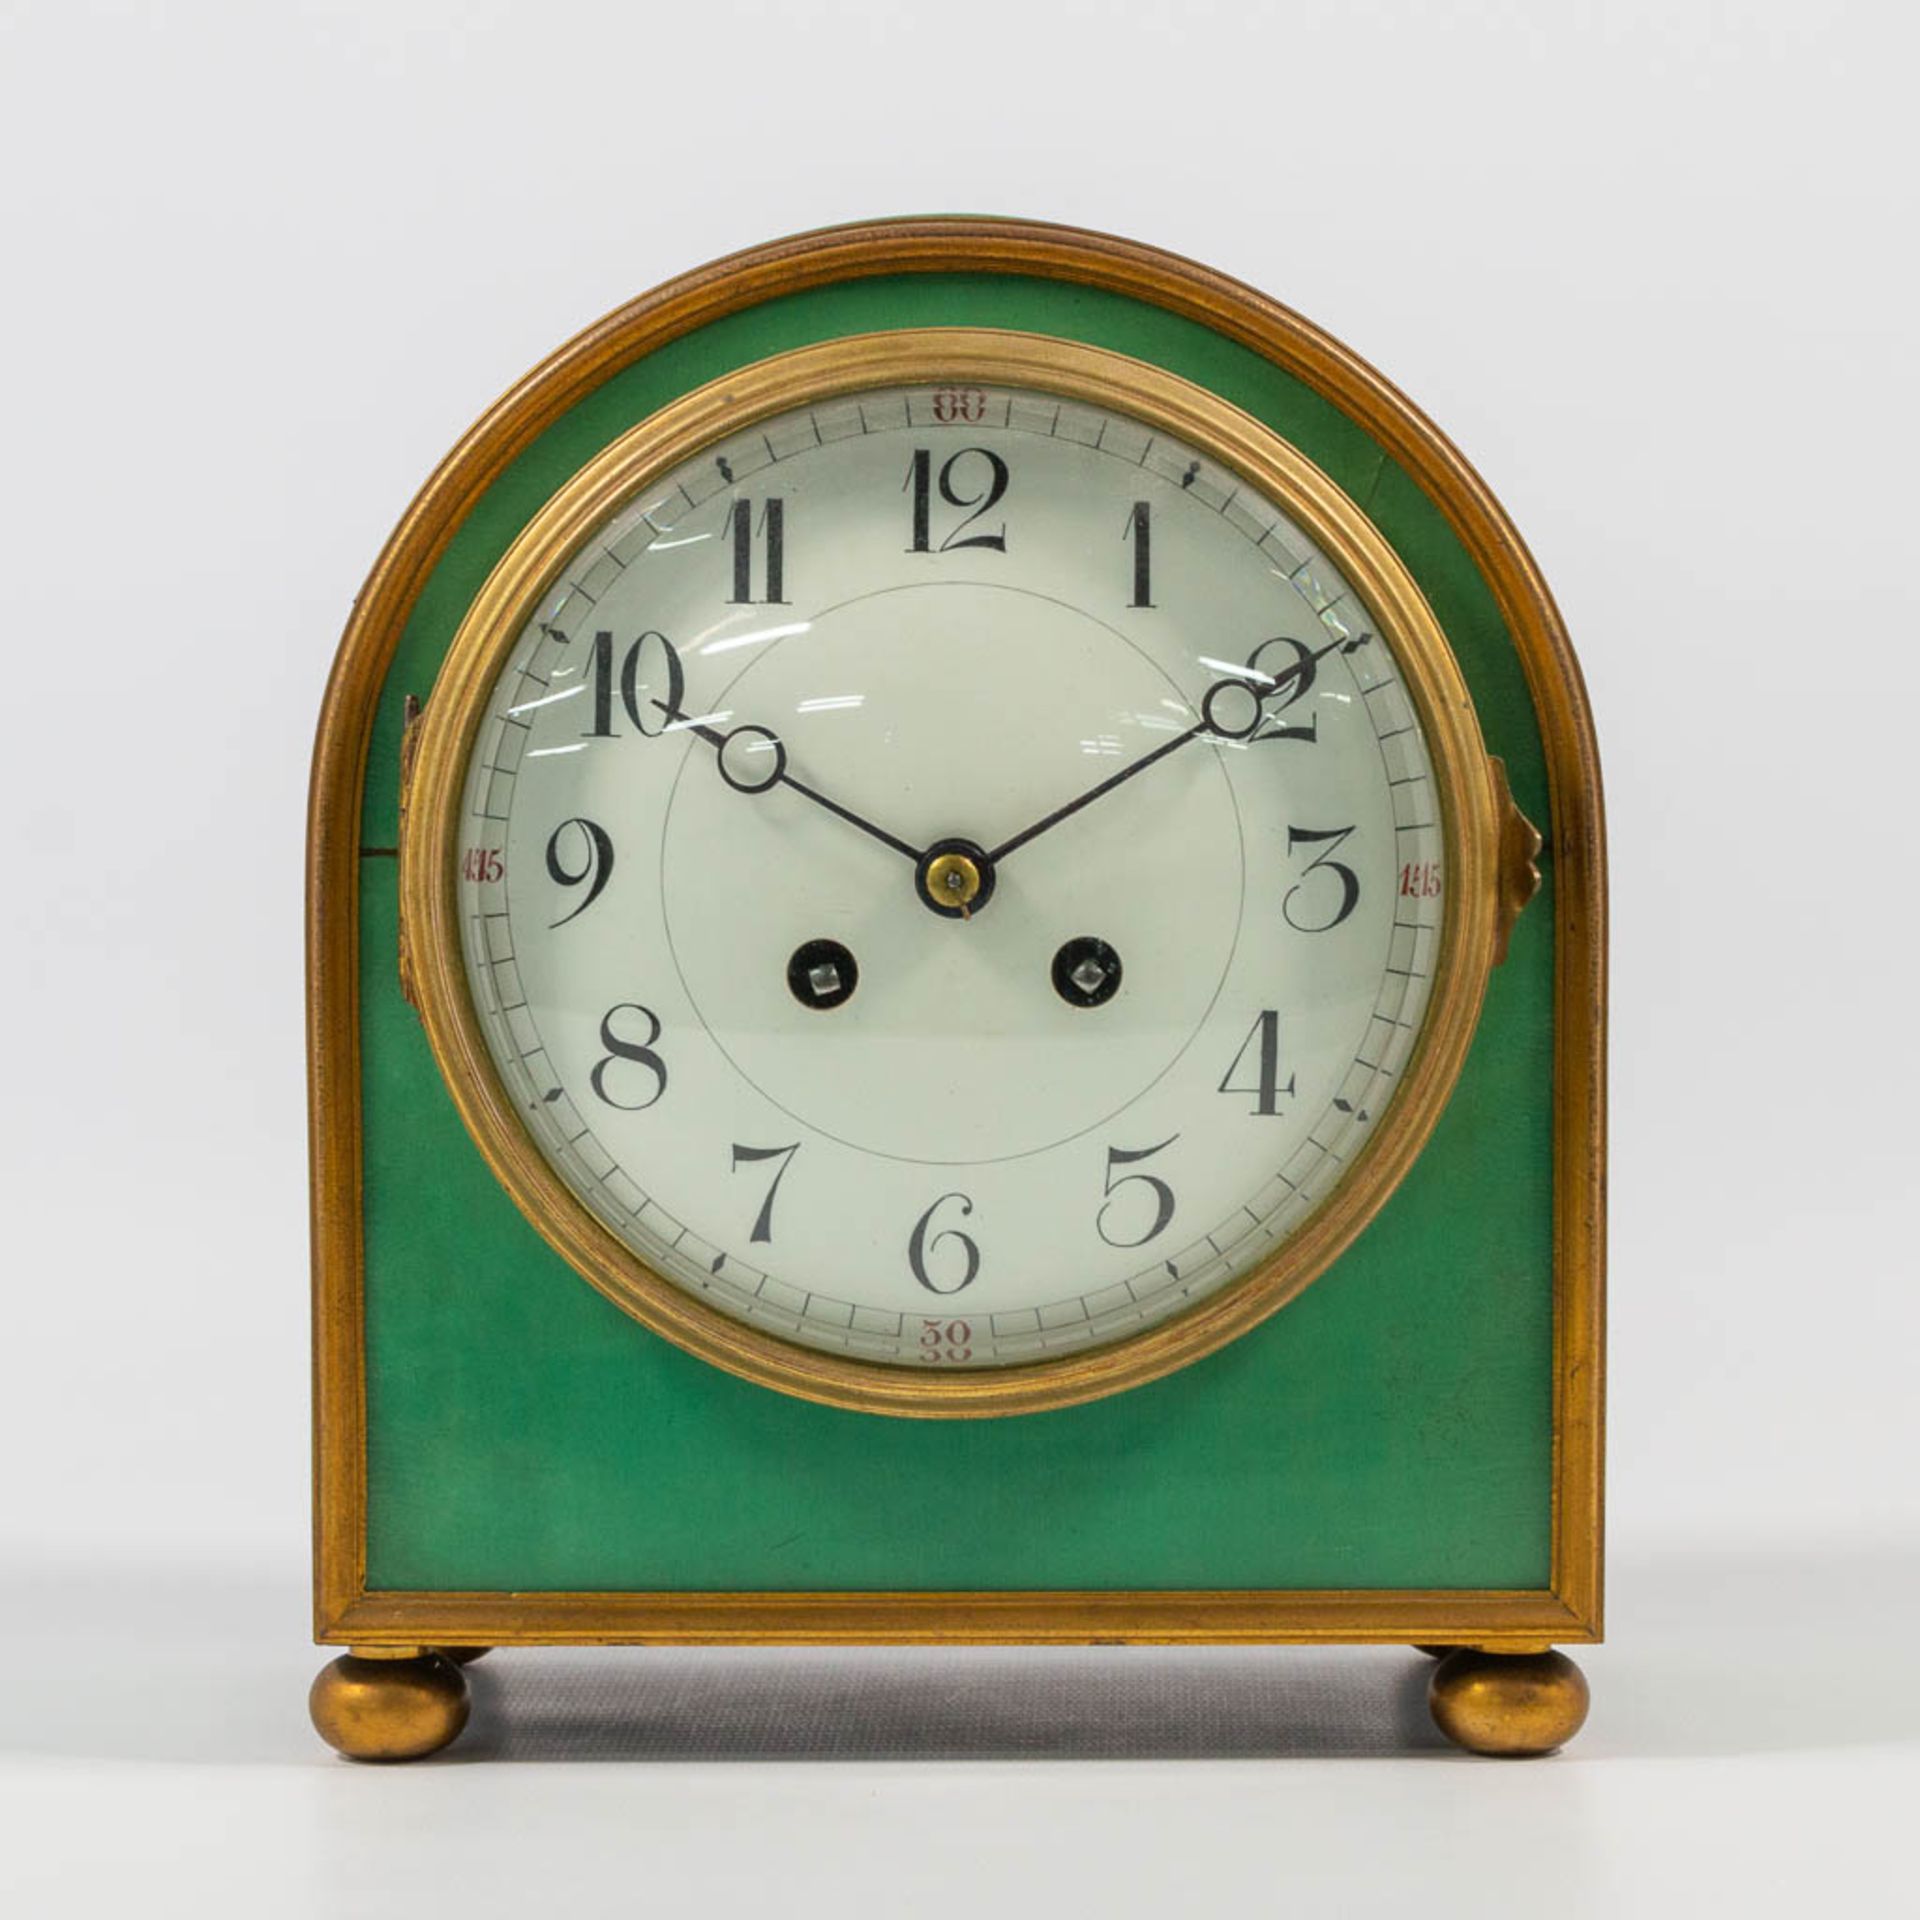 An elegant table clock made of a green lacquered wood case mounted with ormolu bronze, made in Franc